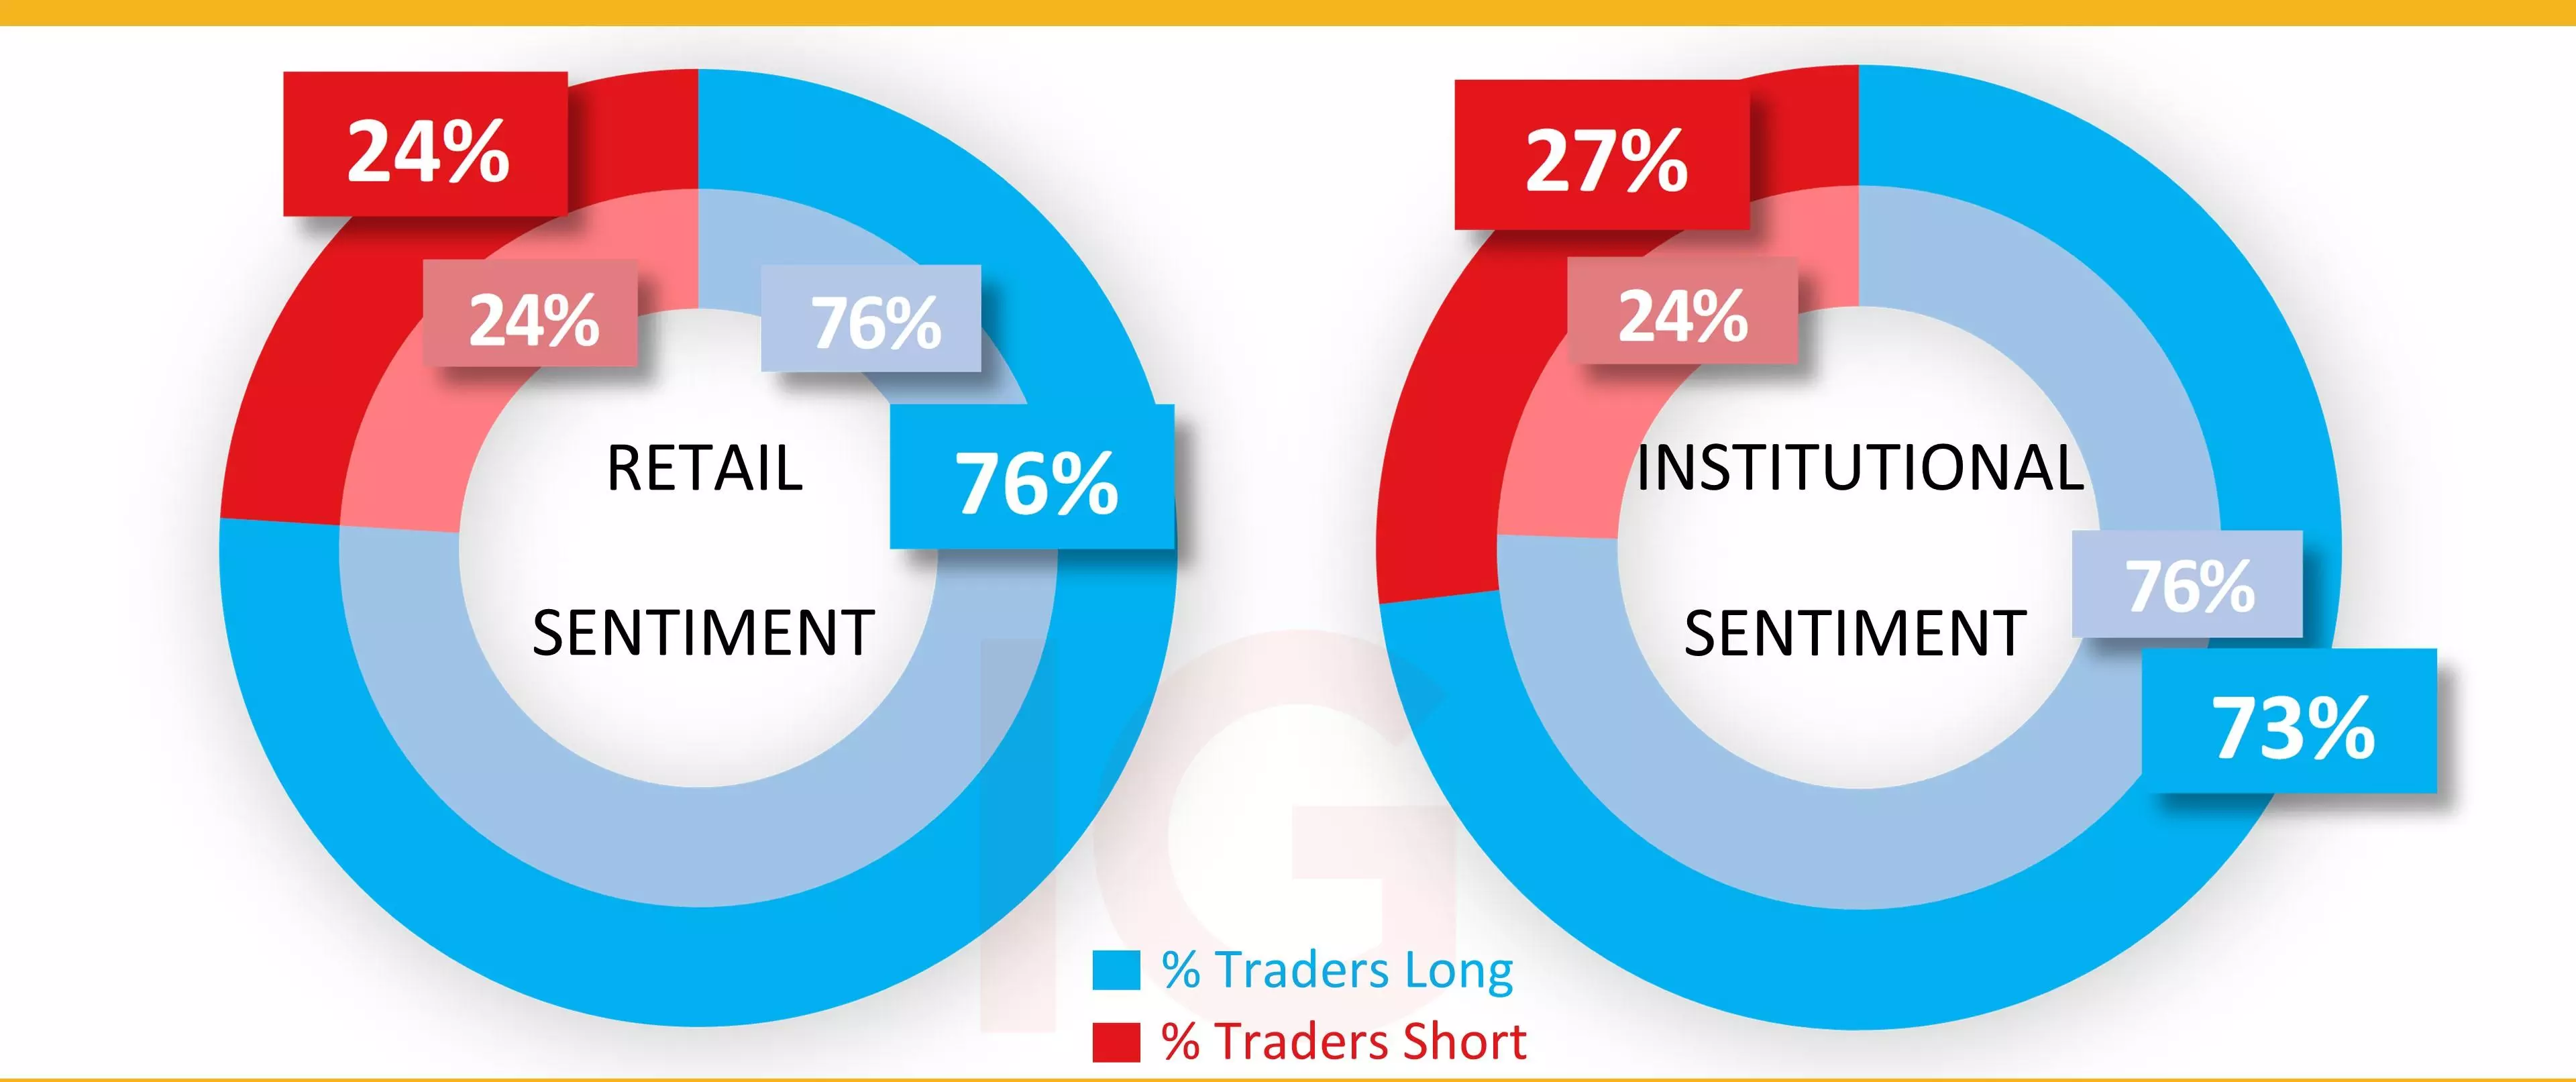 IG client* and CoT** sentiment for Gold